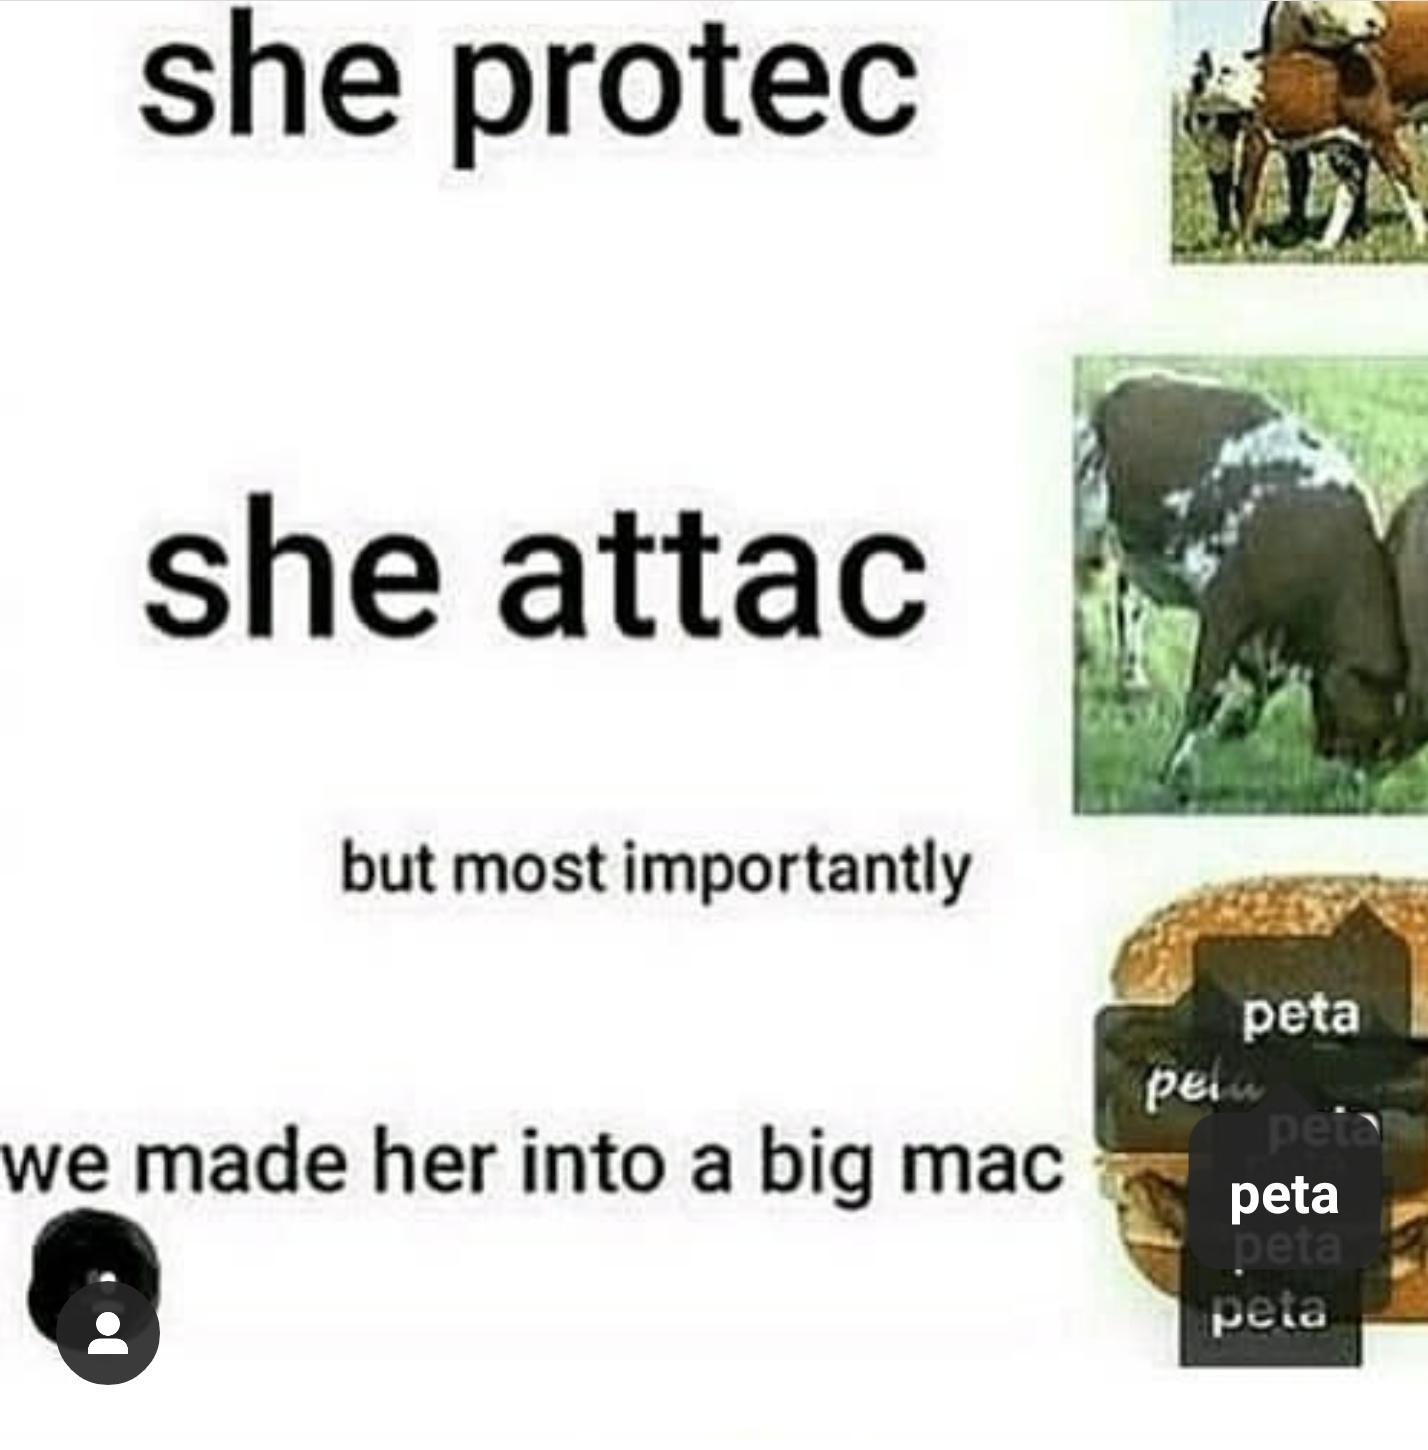 Friendly reminder that Peta still exists and is as shitty as ever - meme